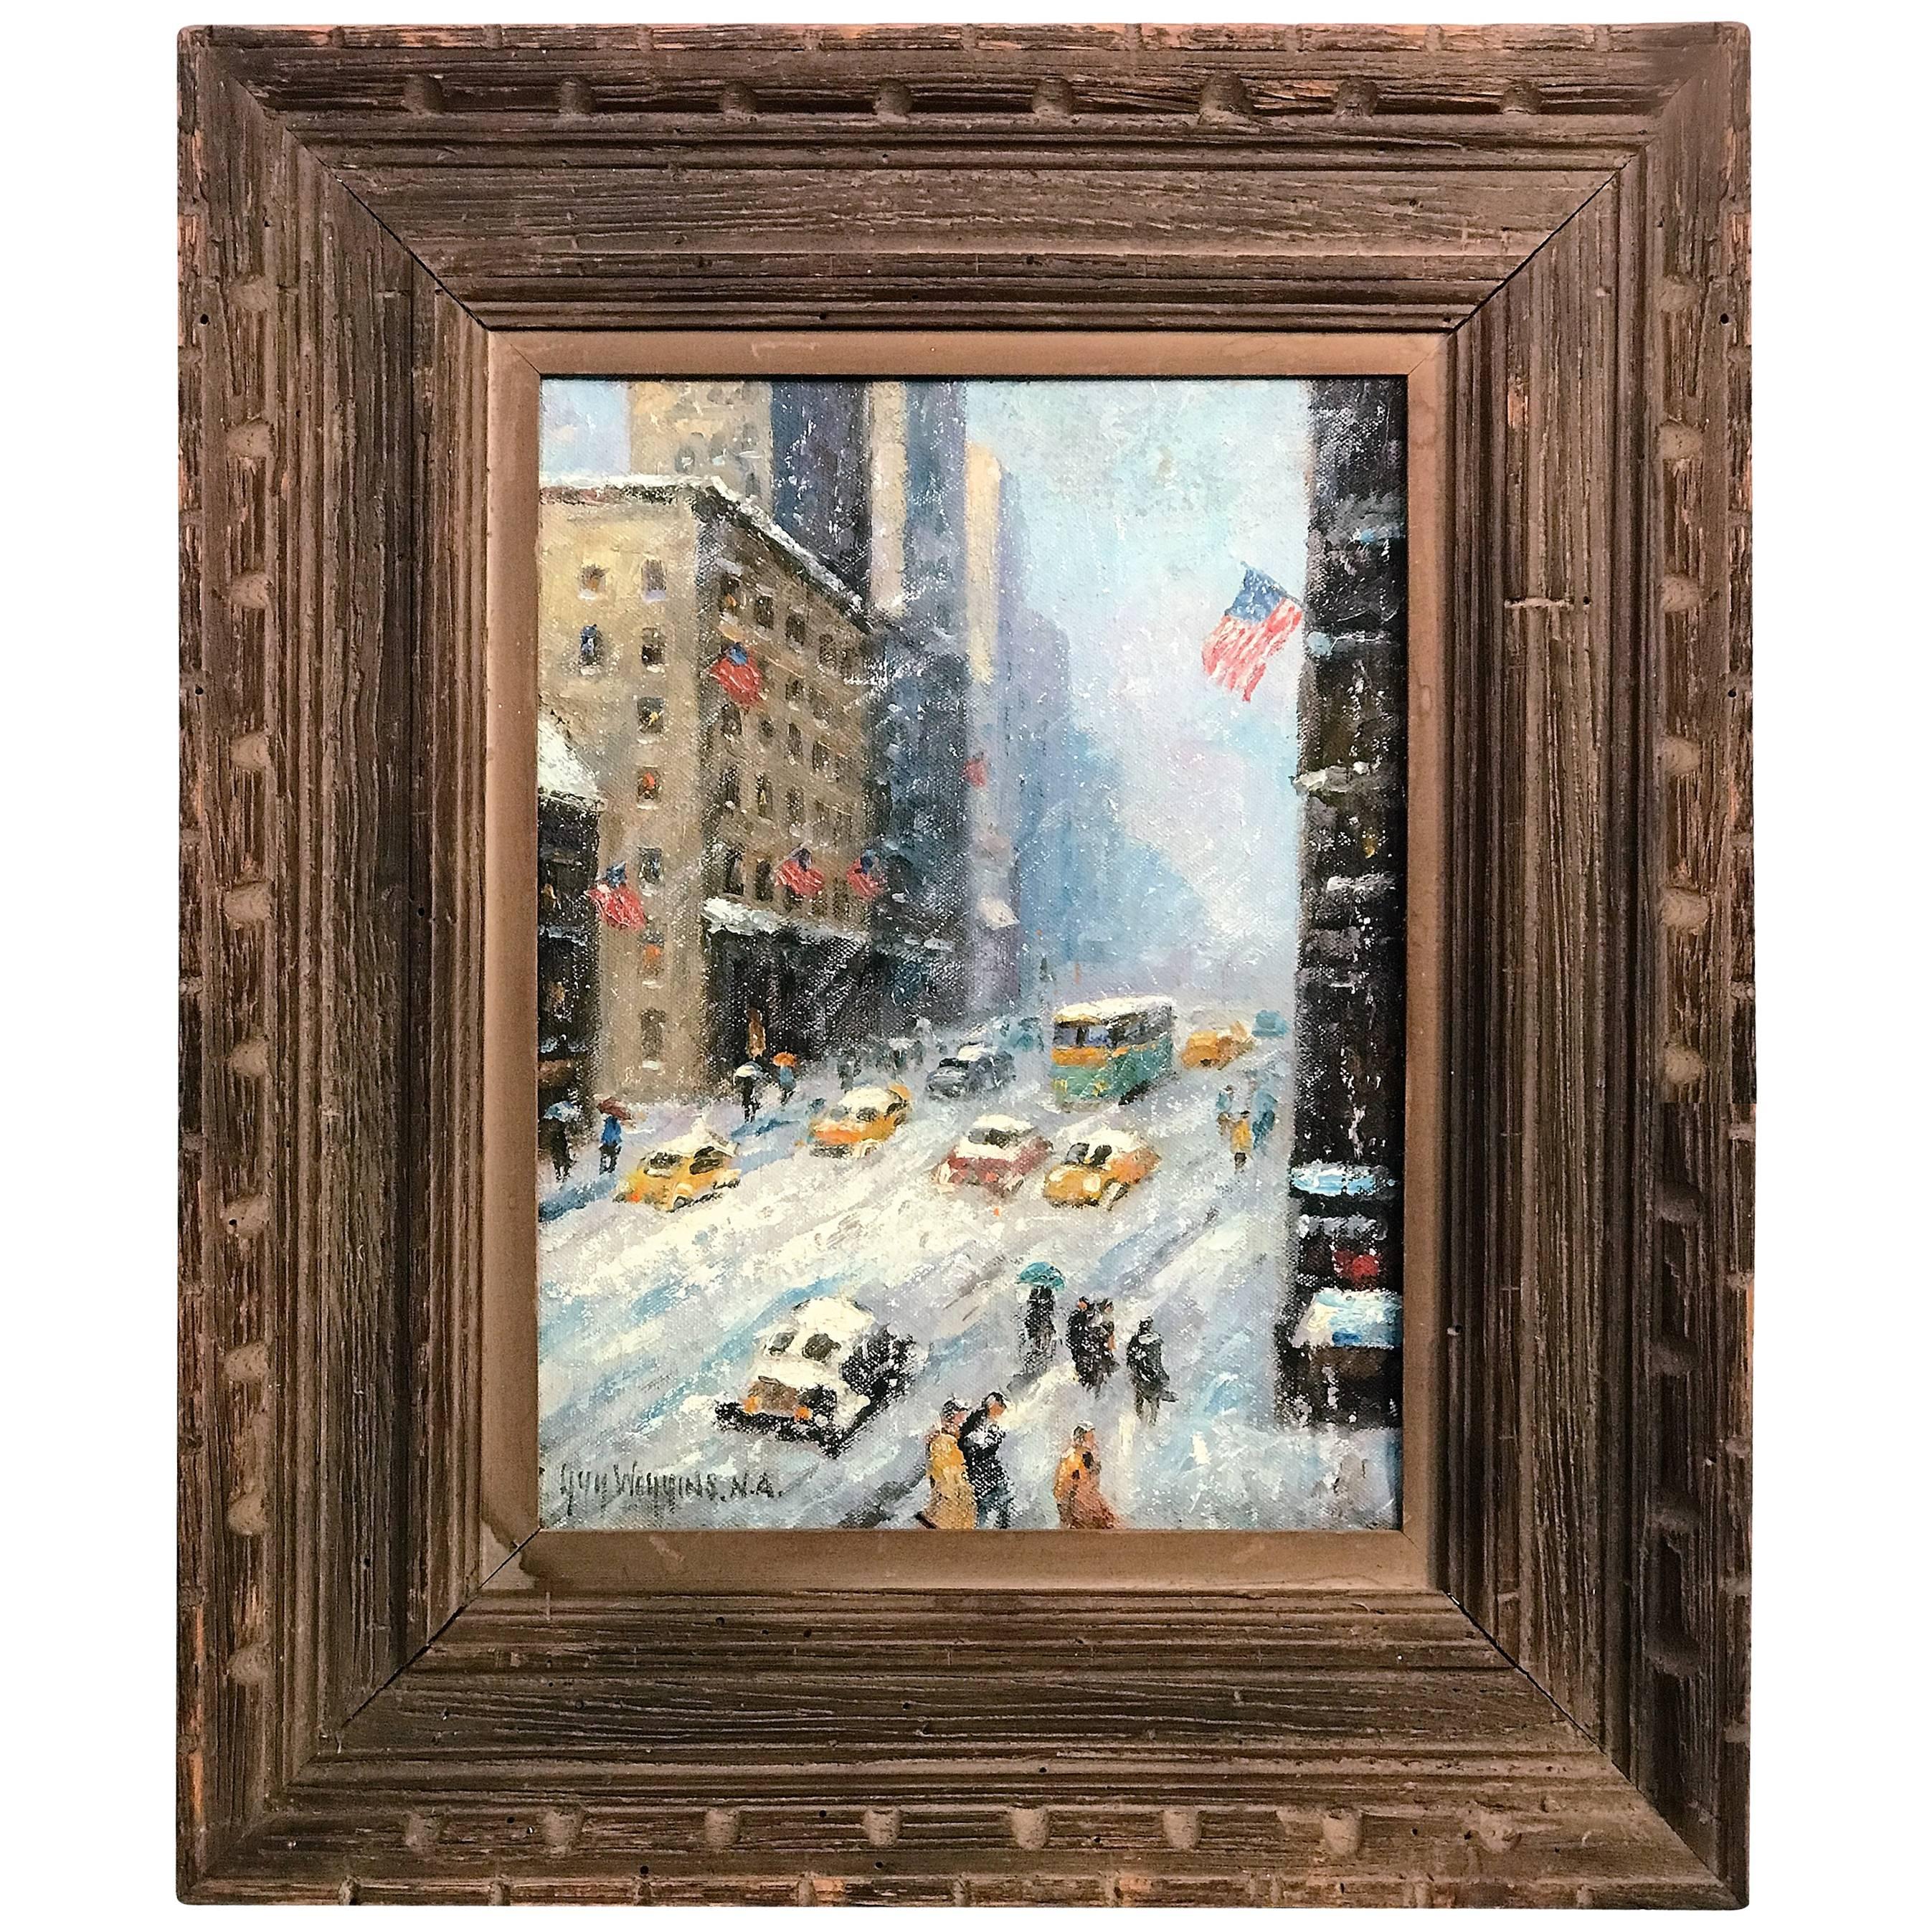 Exceptional Snowy New York City Scene Oil Painting after Guy Wiggins For Sale